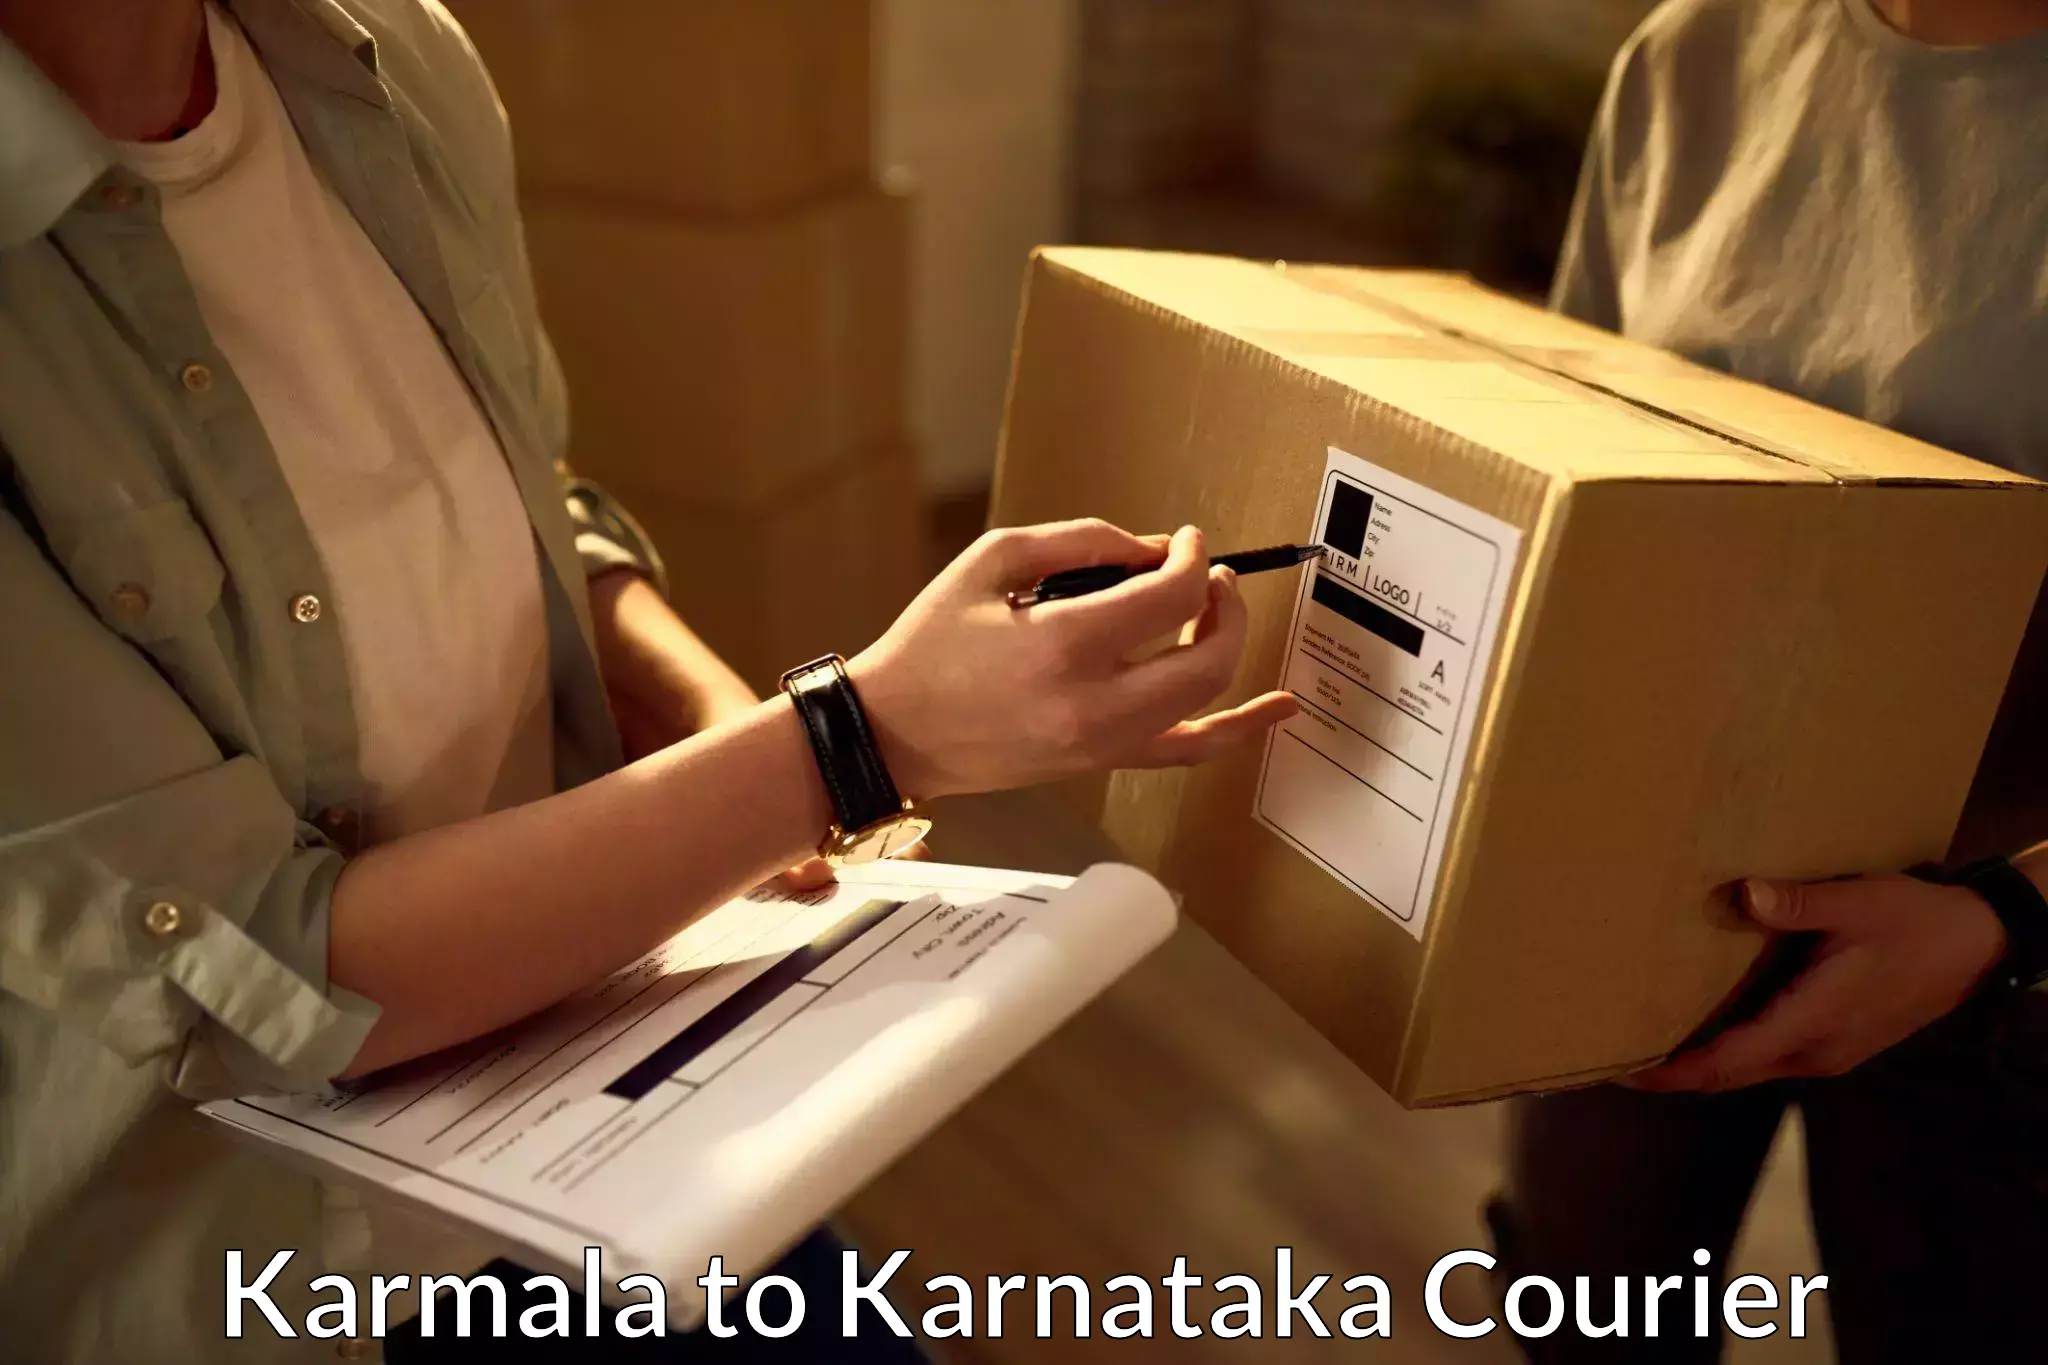 Efficient package consolidation Karmala to Yadgir